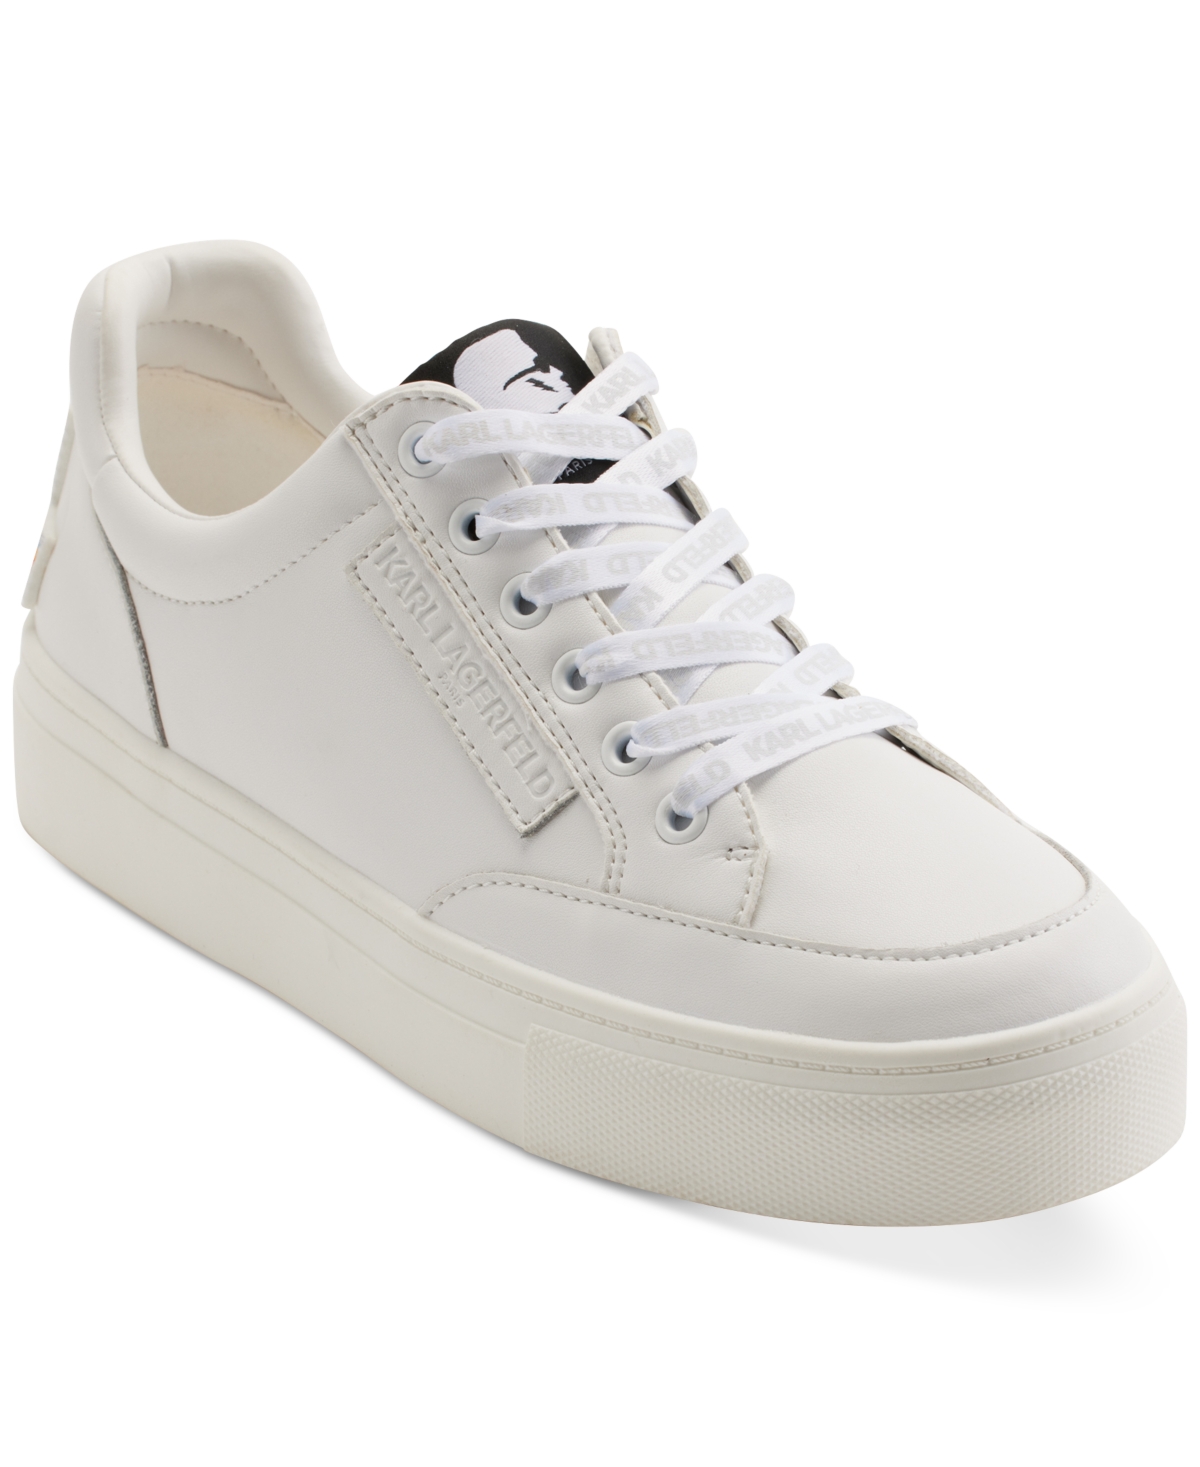 Women's Calico Patch Embellished-Heel Sneakers - Bright White